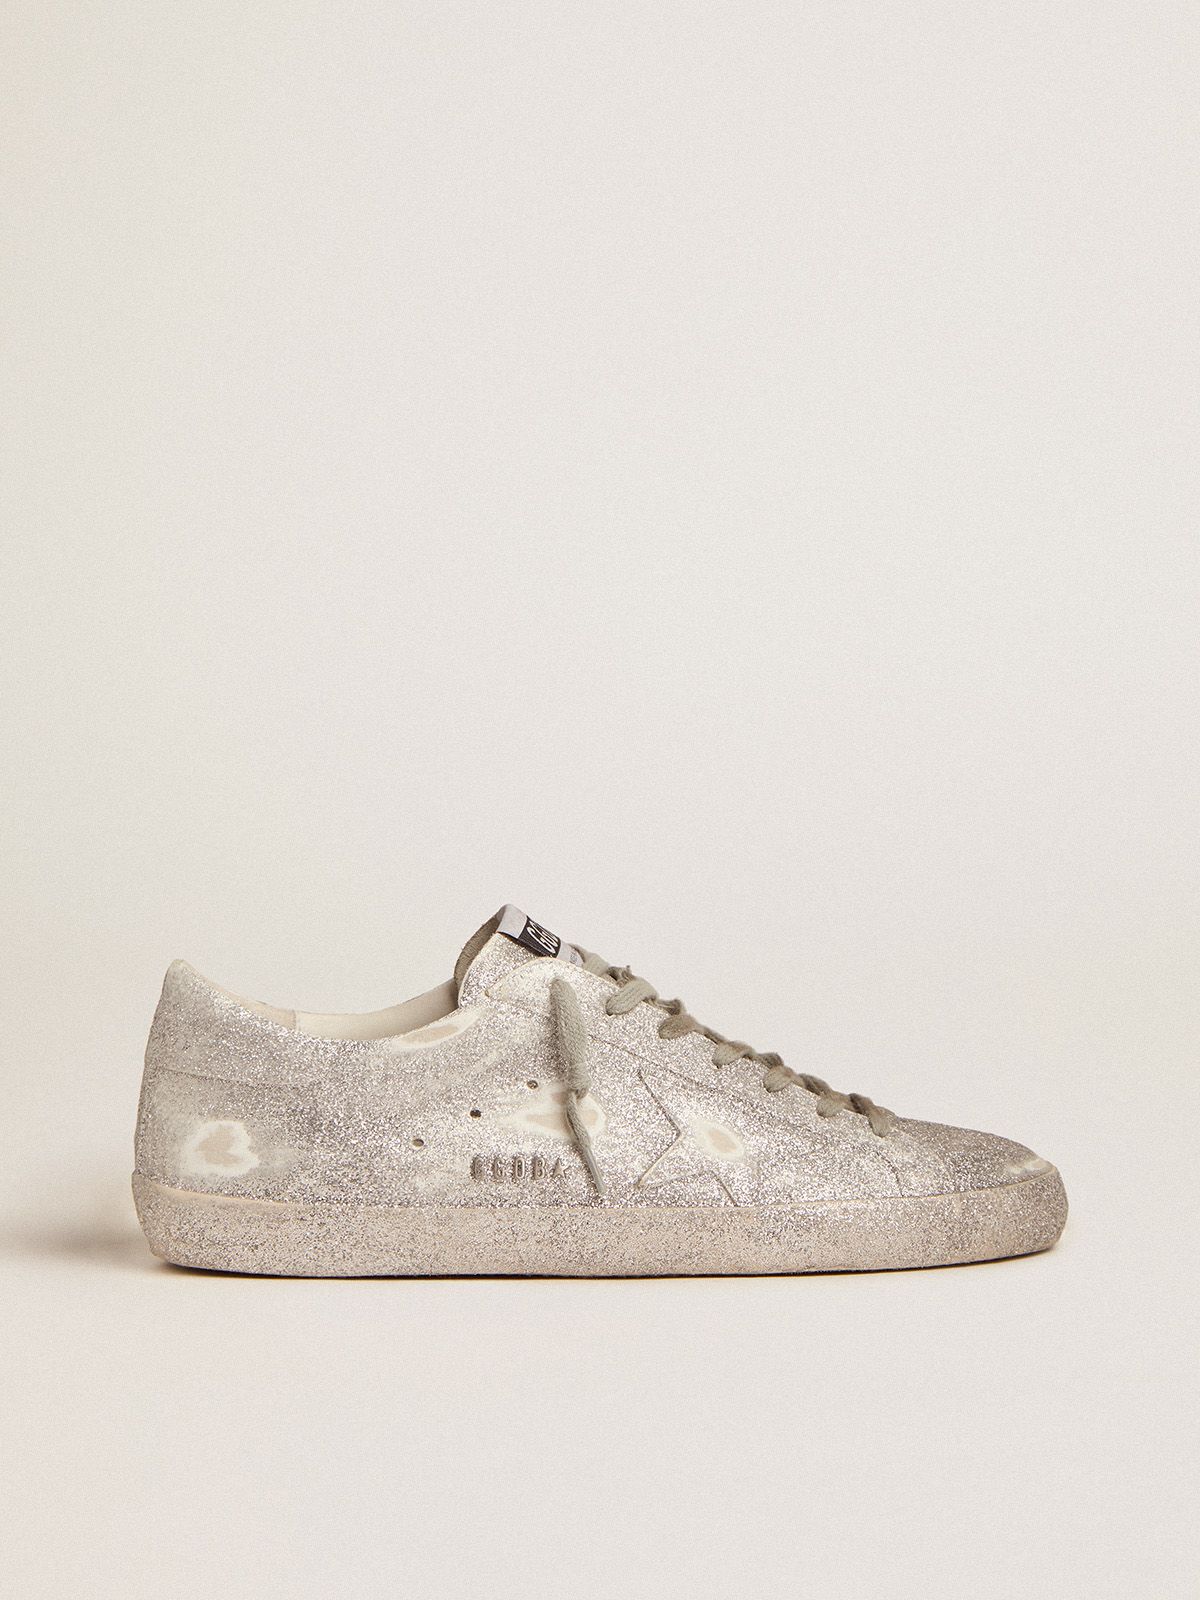 Sneakers Uomo Golden Goose Super-Star sneakers in silver leather with all-over glitter finish